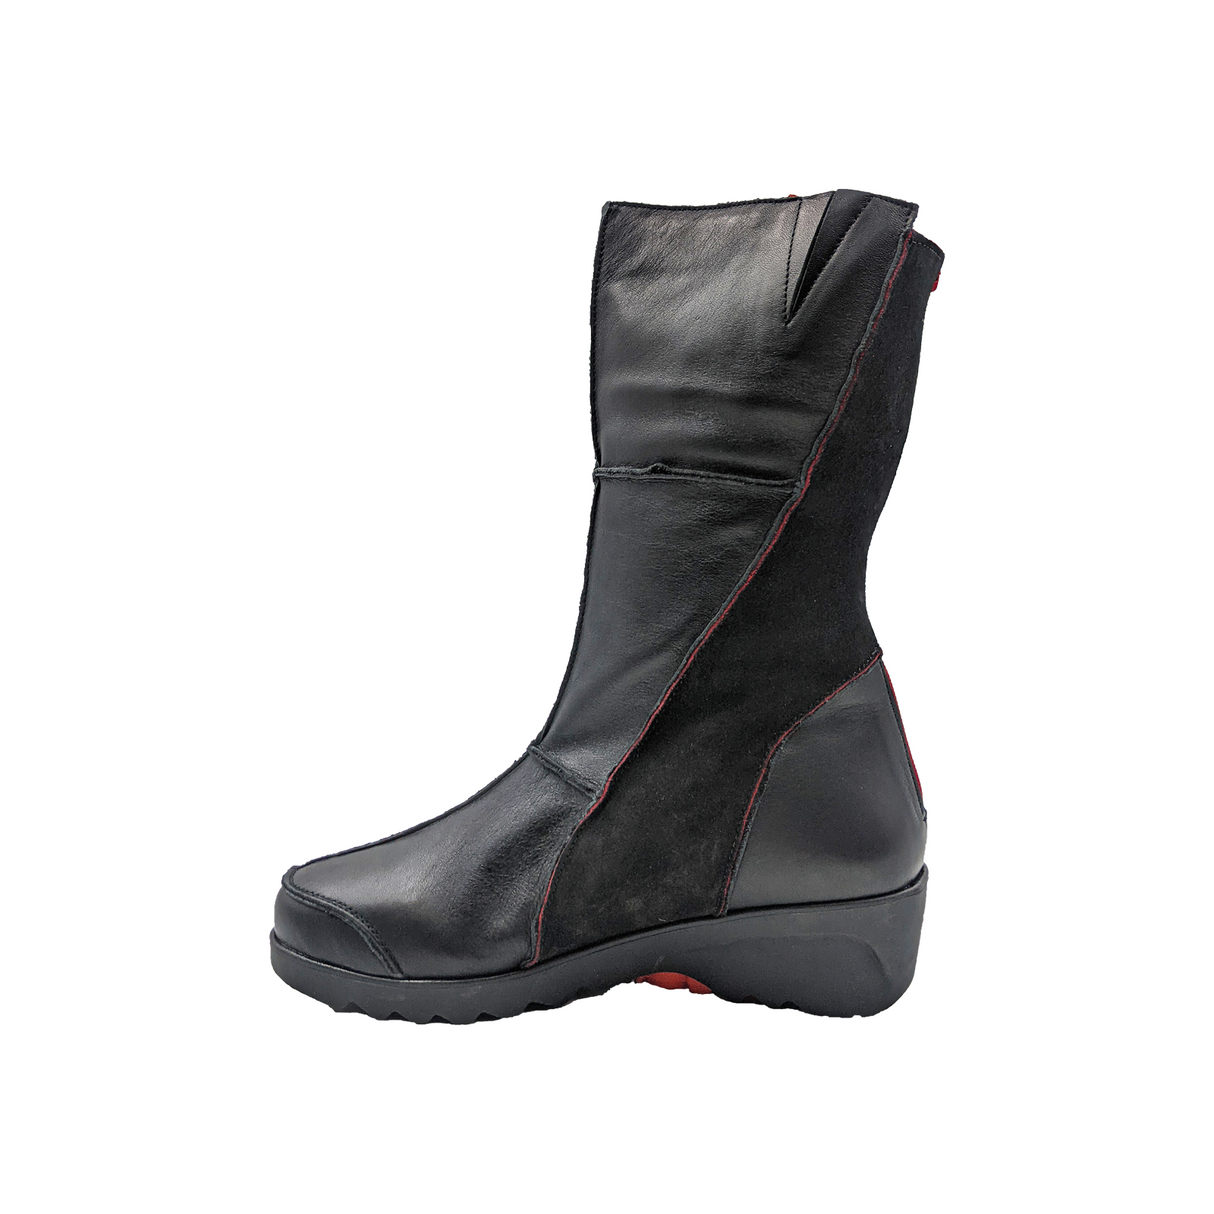 Clamp Inara Mid Wedge Boot (Women) - Black/Red Boots - Fashion - Mid Boot - The Heel Shoe Fitters